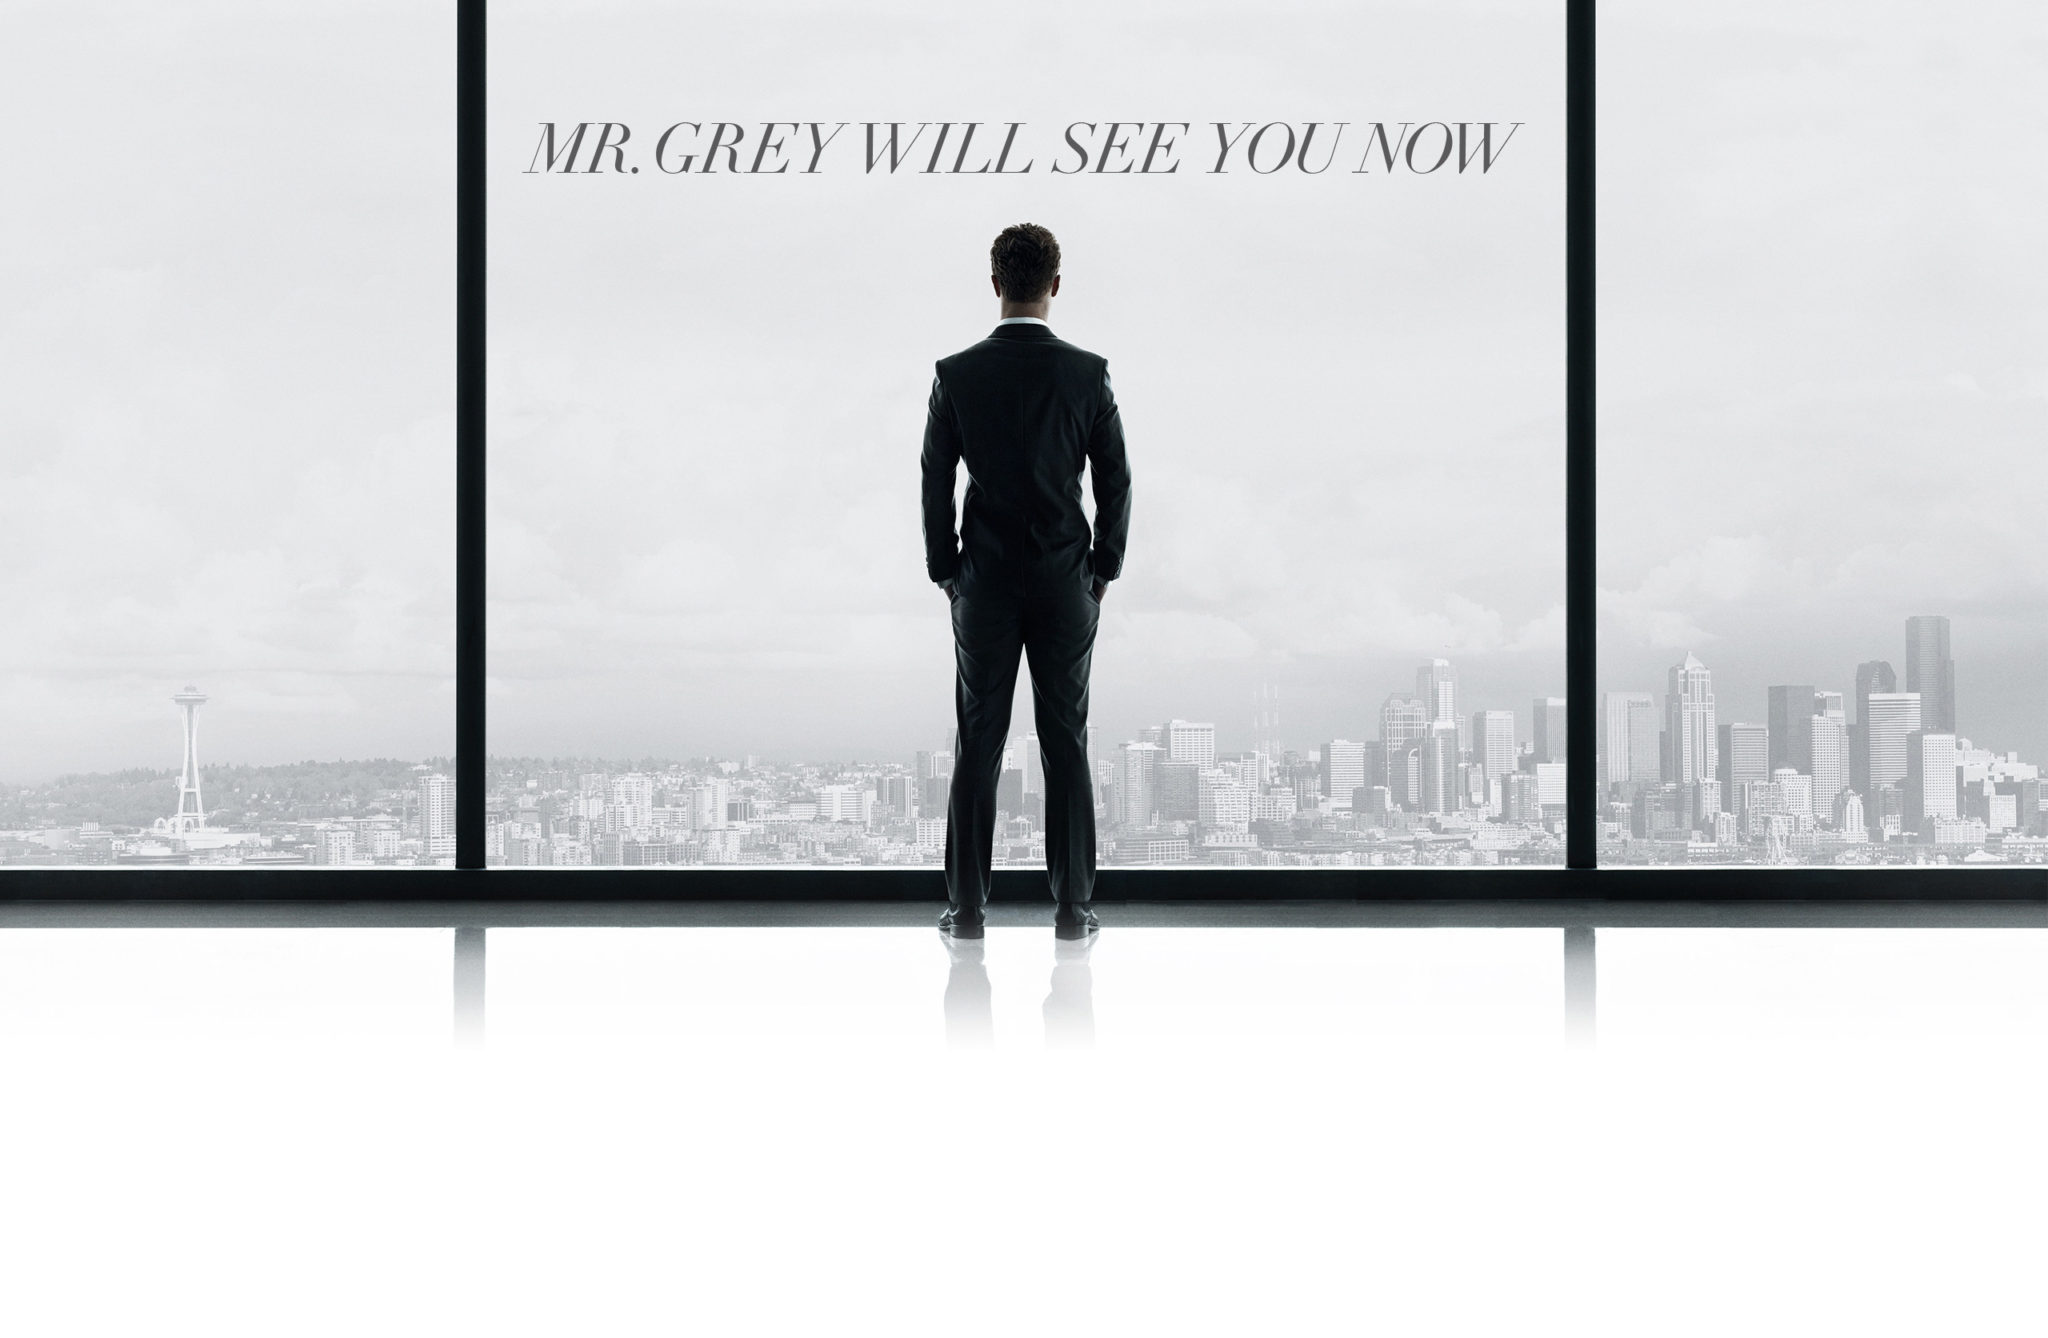 50-shades-of-grey-premiere-trailer-released-by-universal-pictures